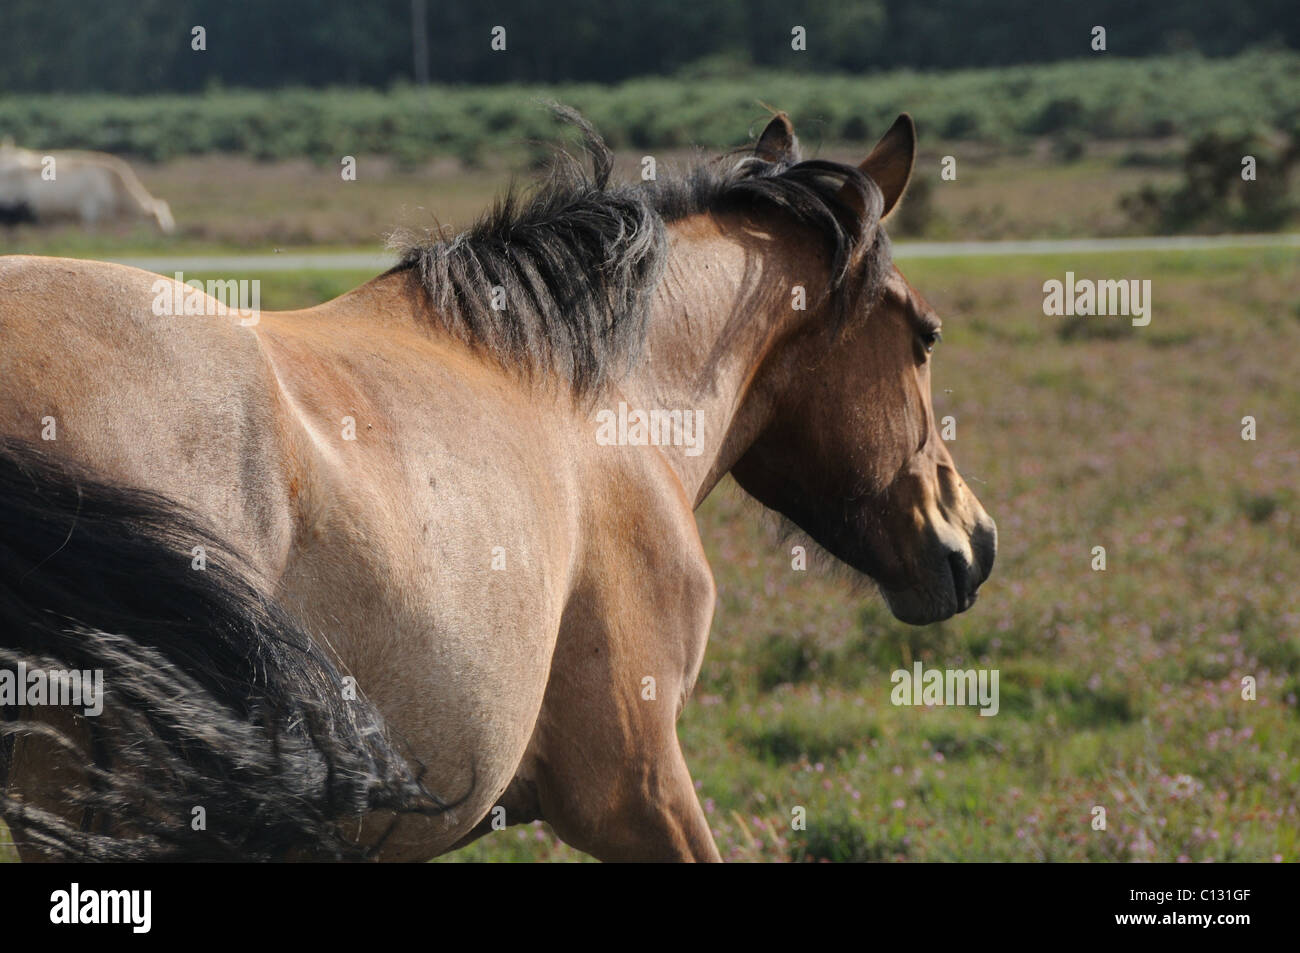 New fForest pony on the move Stock Photo